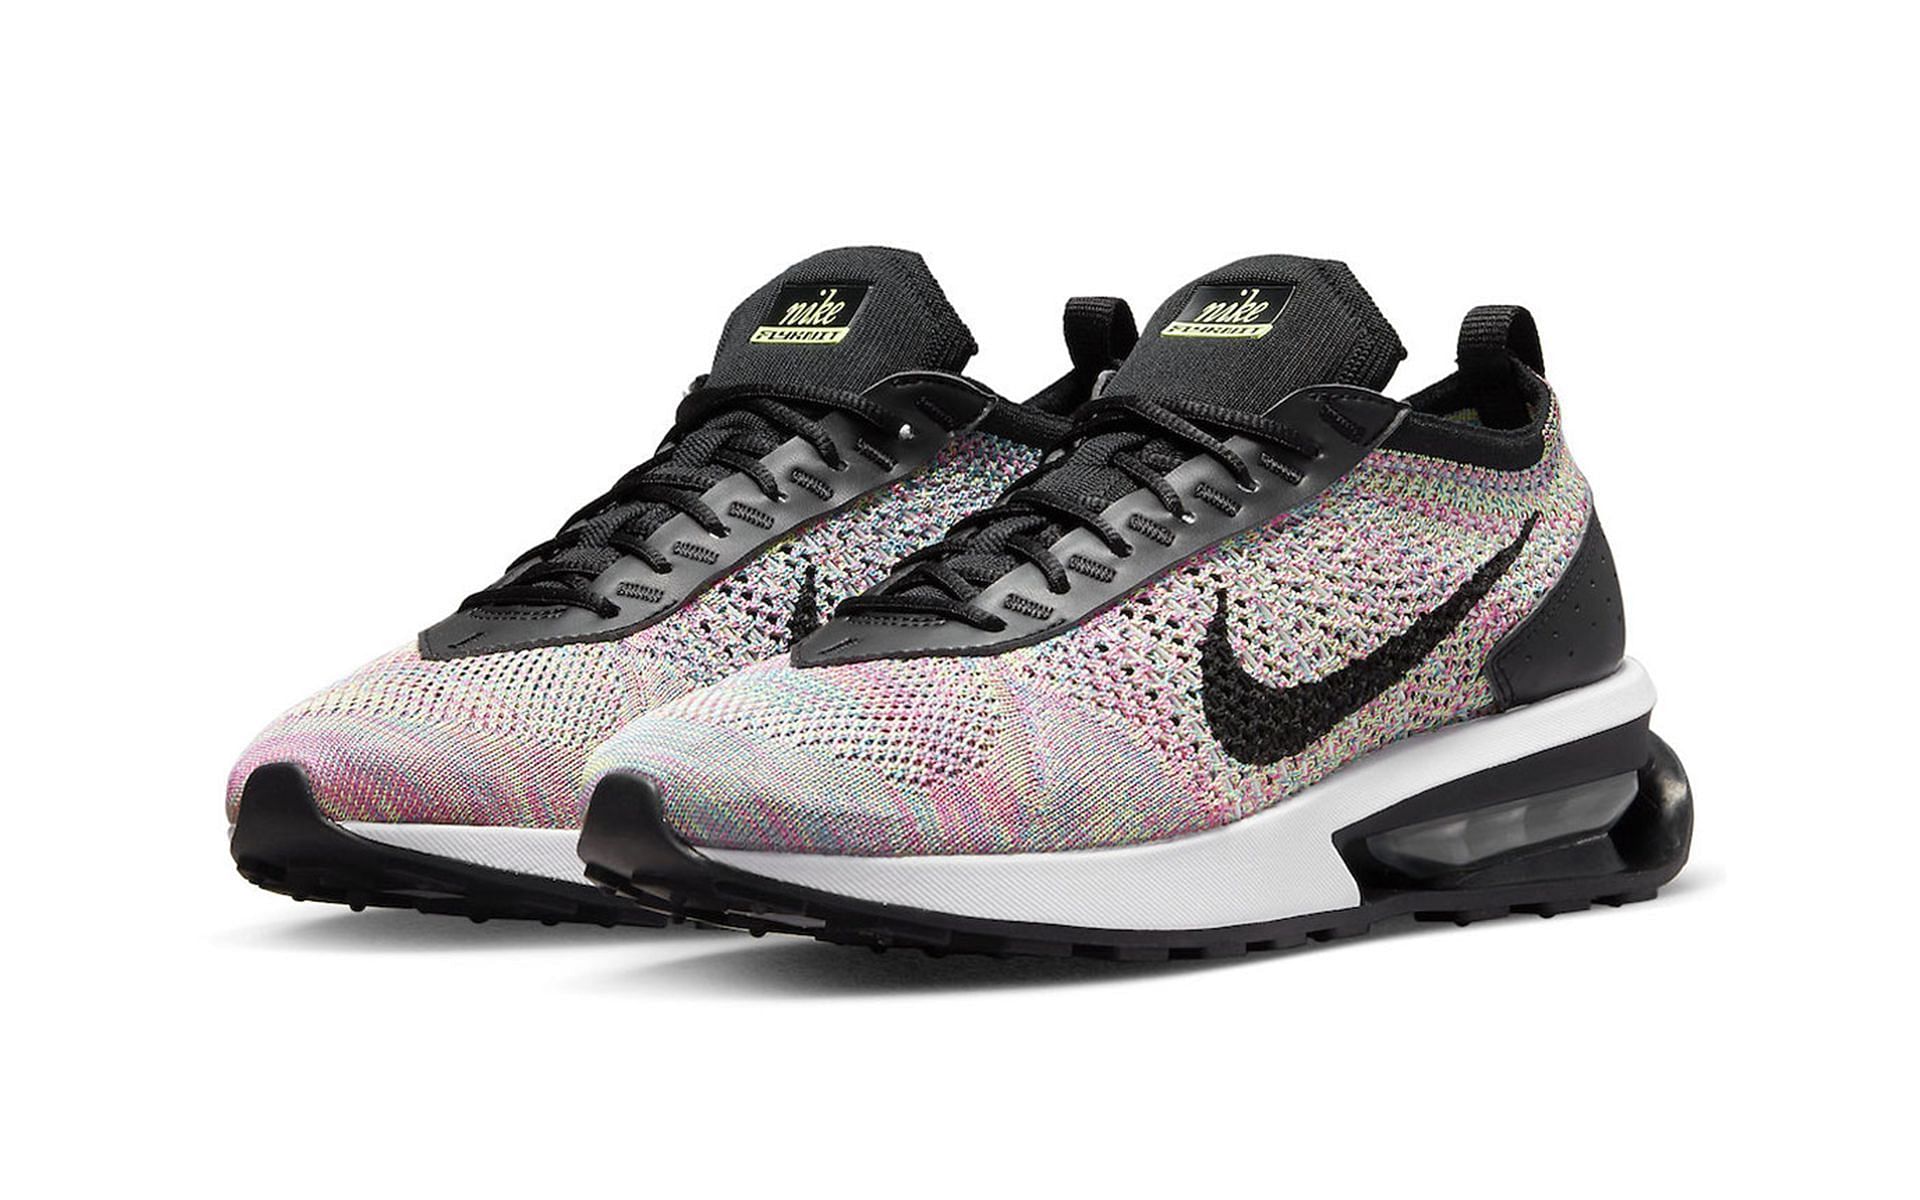 Where to buy Nike Air Max Flyknit Multicolor shoes Release price and more explored